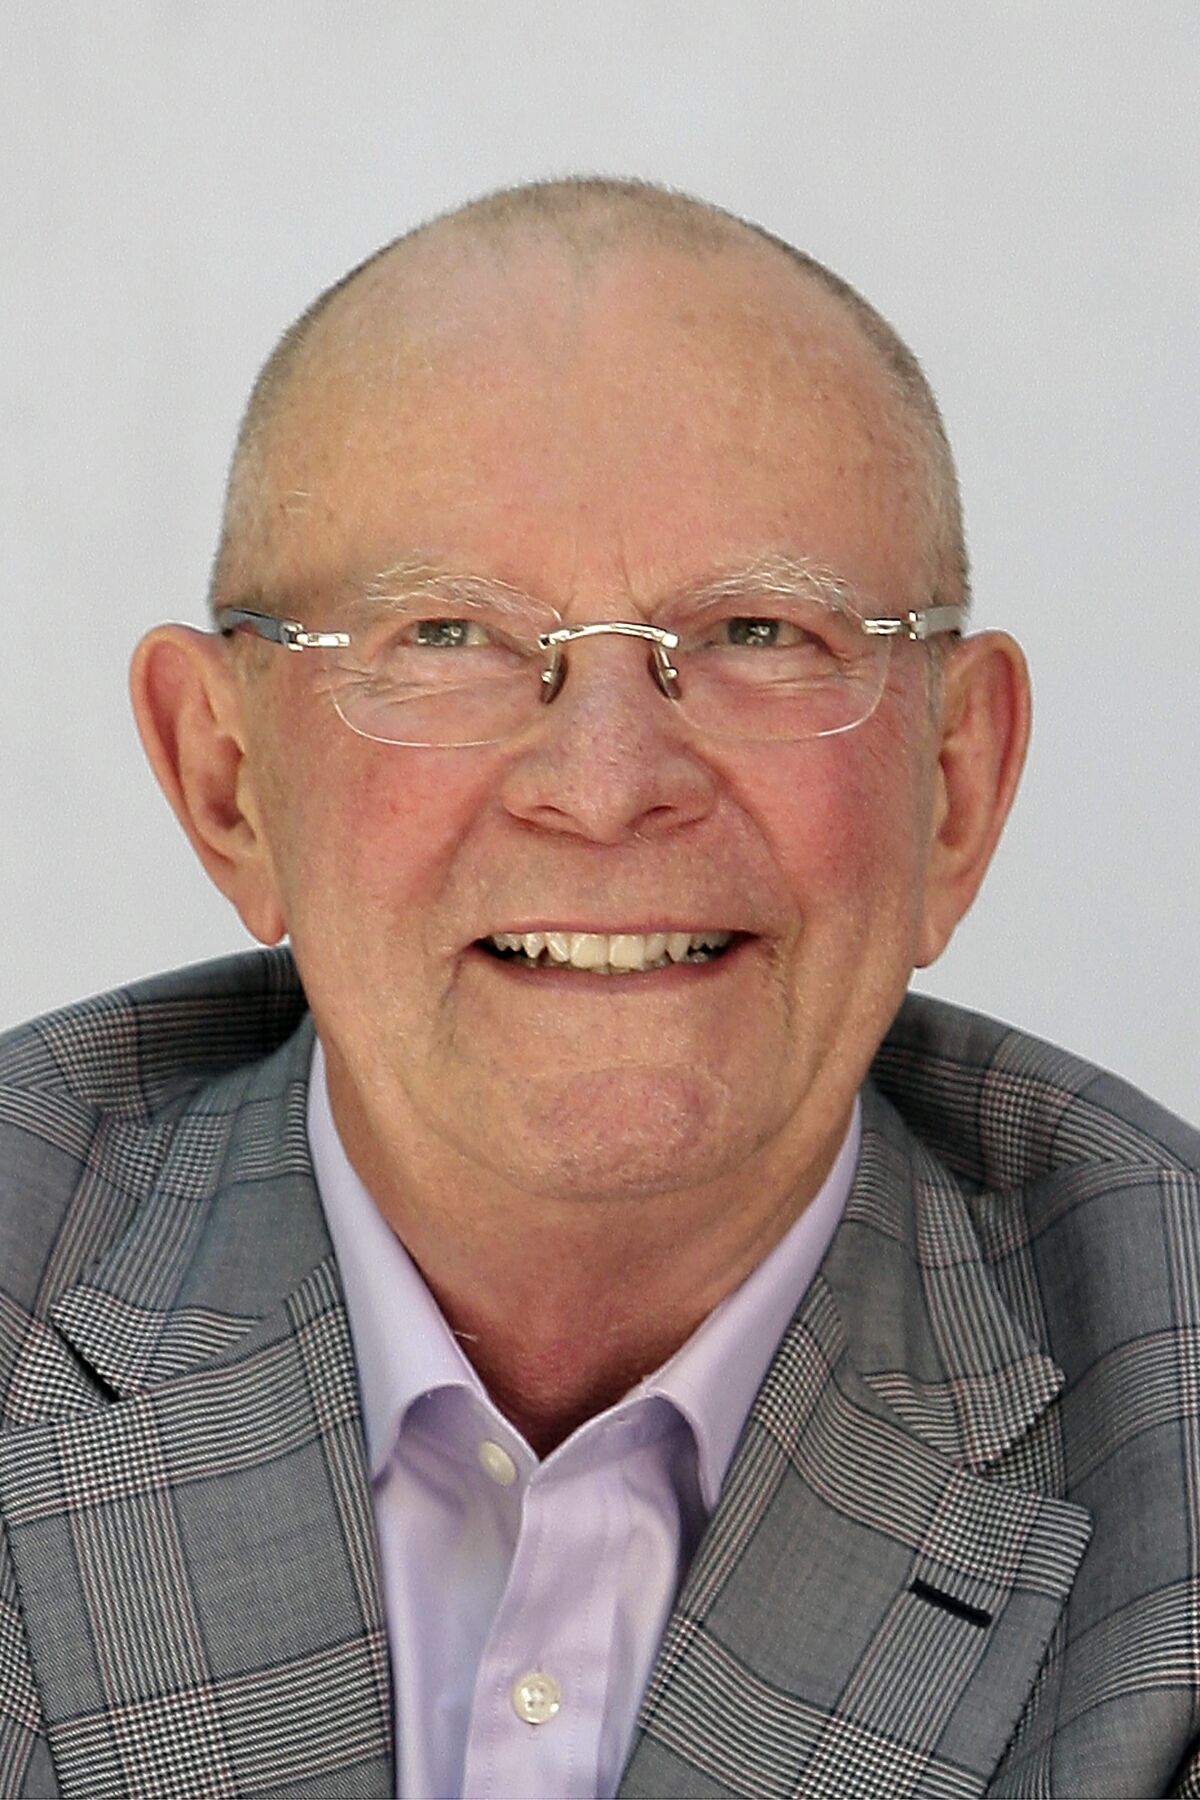 Wilbur Smith is shown in this June 20, 2011 photo in Rome. Smith died unexpectedly at his home in Cape Town, South Africa on Saturday, Nov. 13, 2021, his office said in an obituary posted on the website, wilbursmithbooks.com. (Cosima Scavolini/LaPresse via AP)